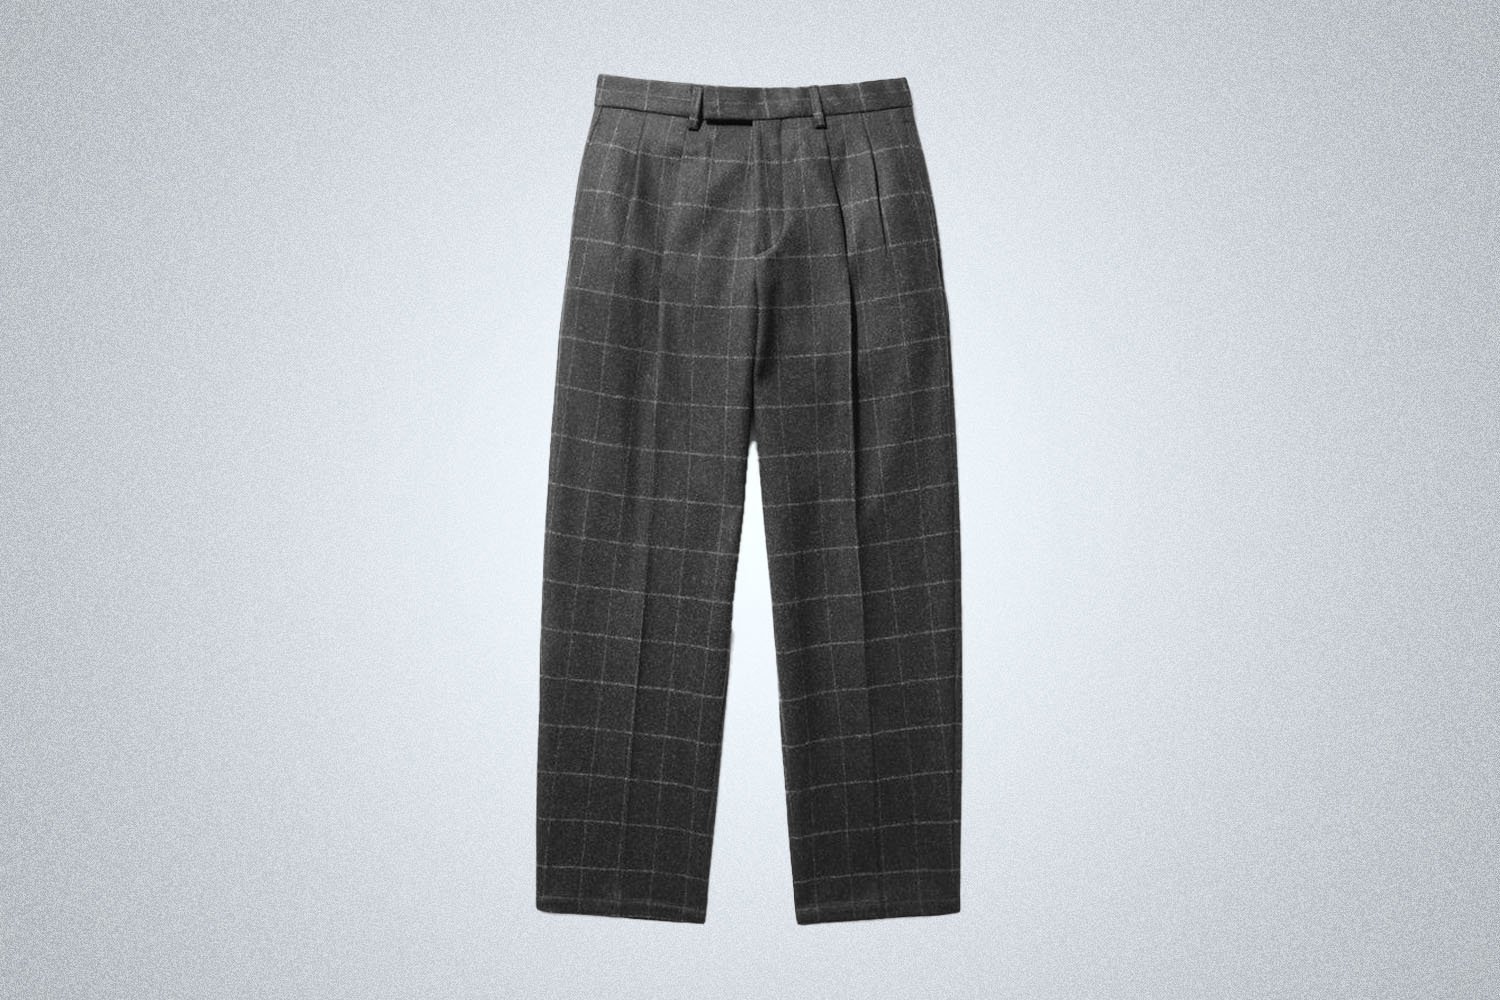 a pair of wool, grey pleated pants